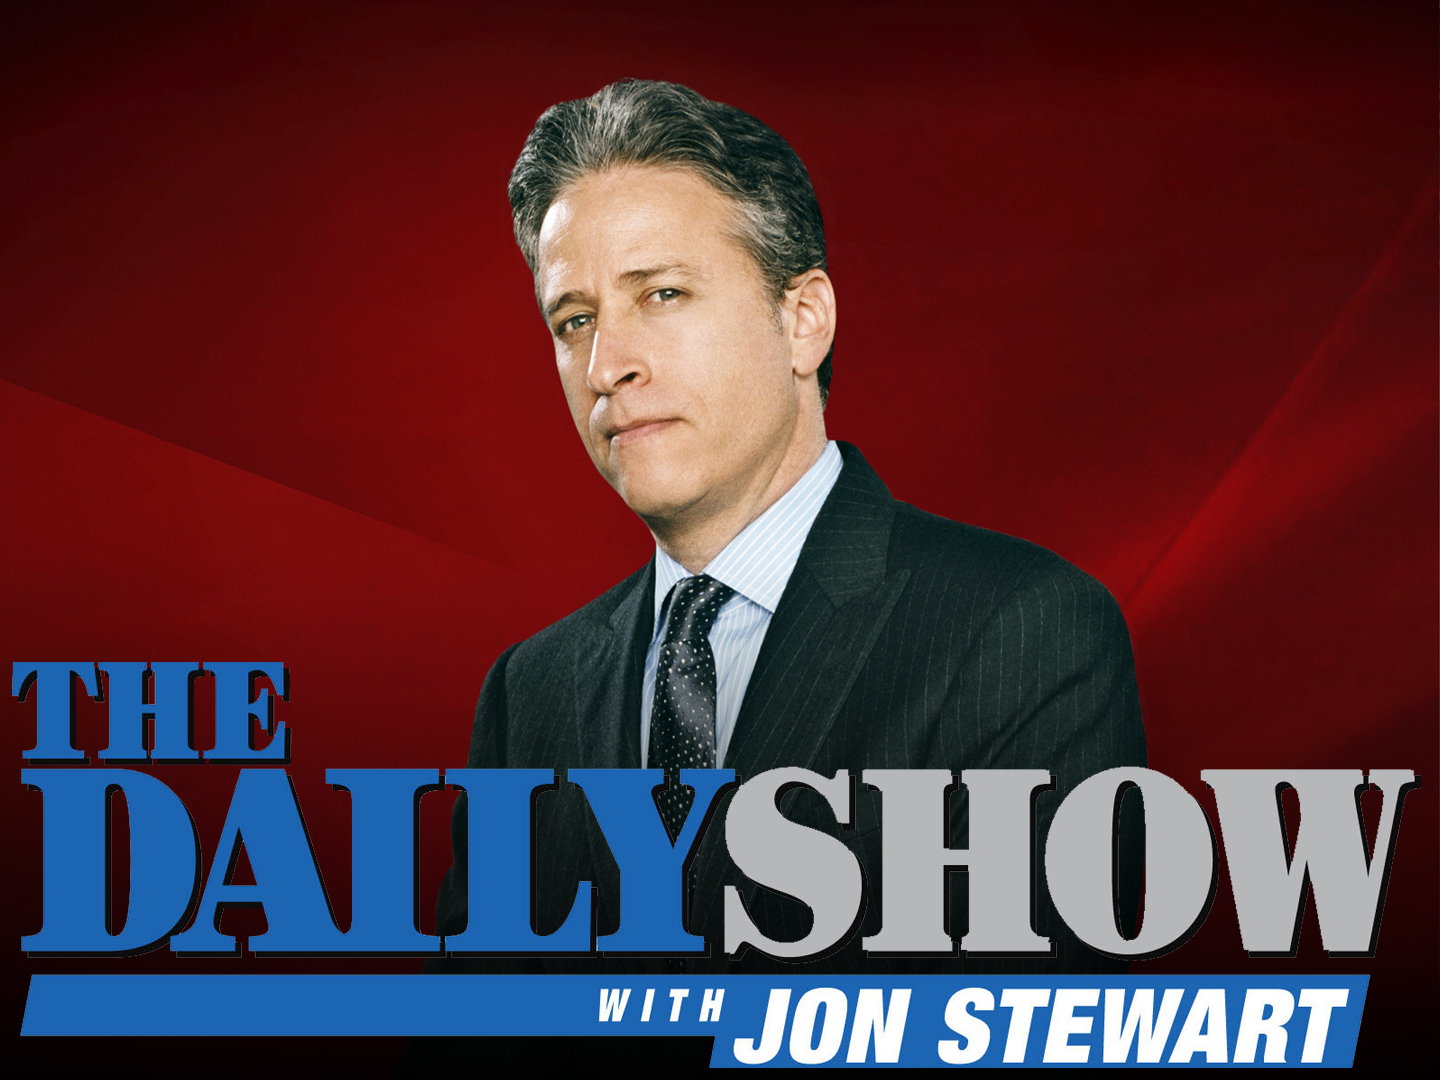 The 2 Things Conservatives and Liberals Get Wrong About Jon Stewart | 93.1 WIBC